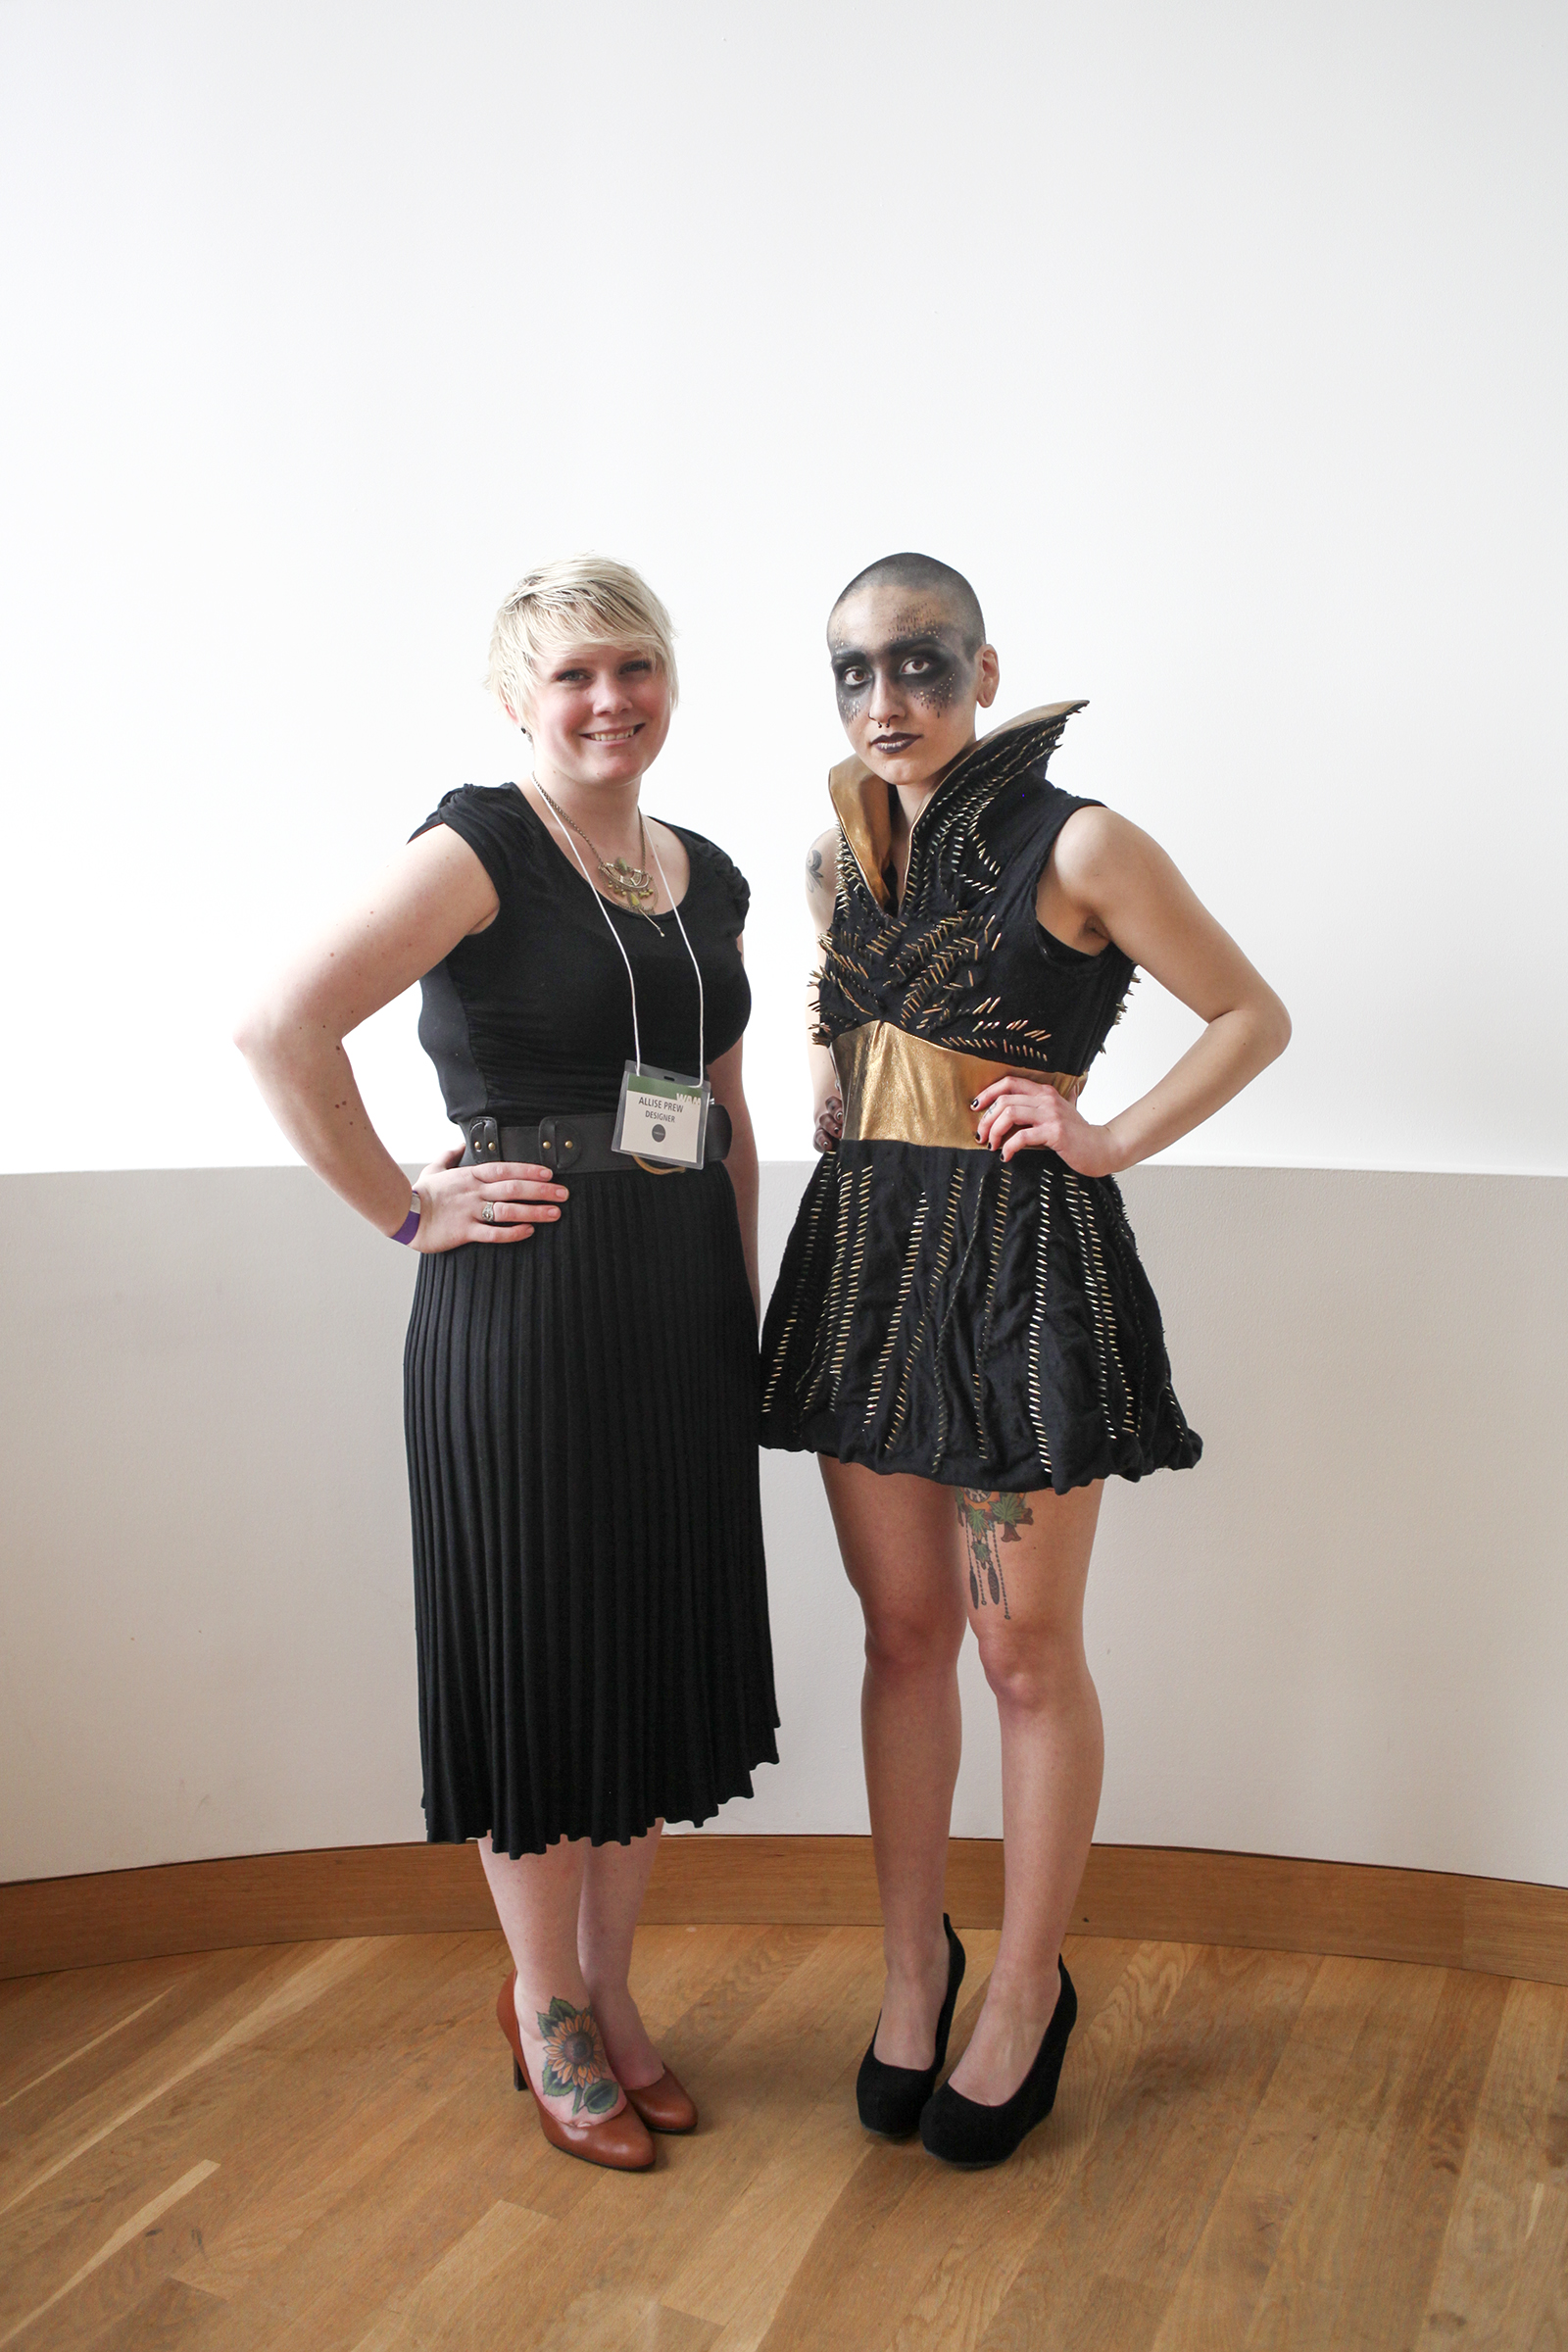 Designer Allise Prew and model Carli Hassan, Photo by Amy Gee